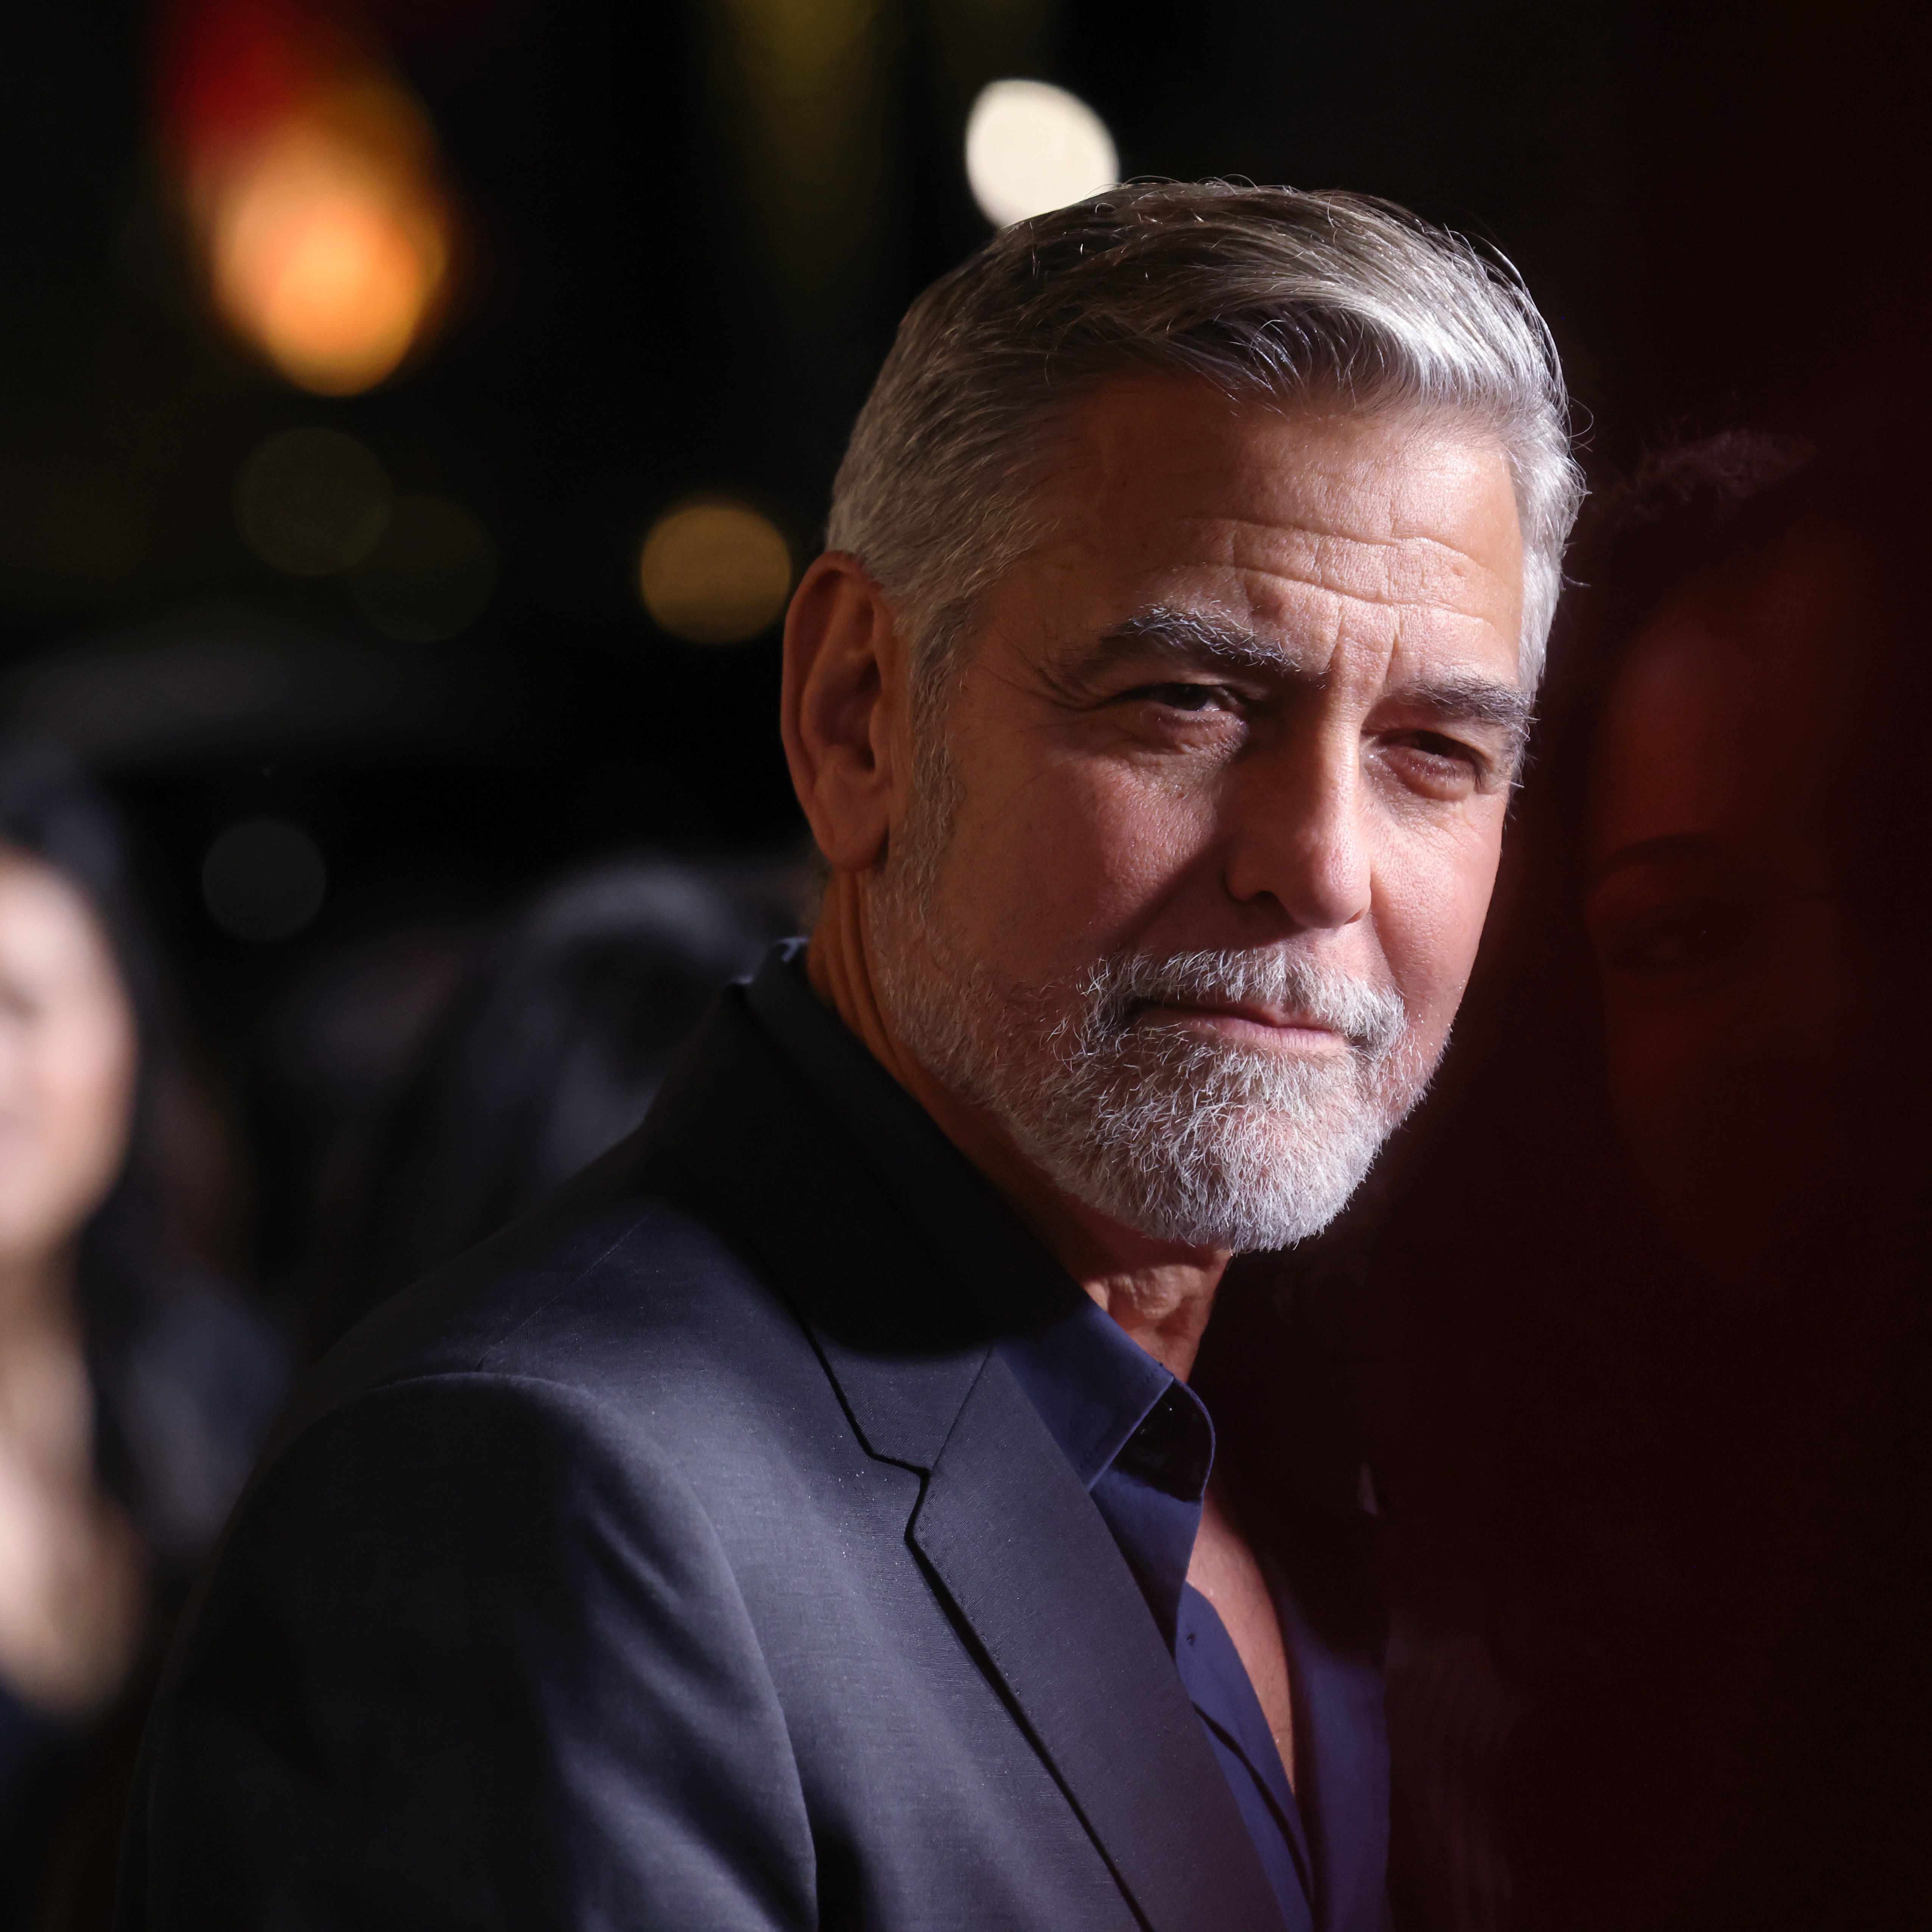 Donald Trump Attacks “Fake Movie Actor” George Clooney After NYT Op-Ed